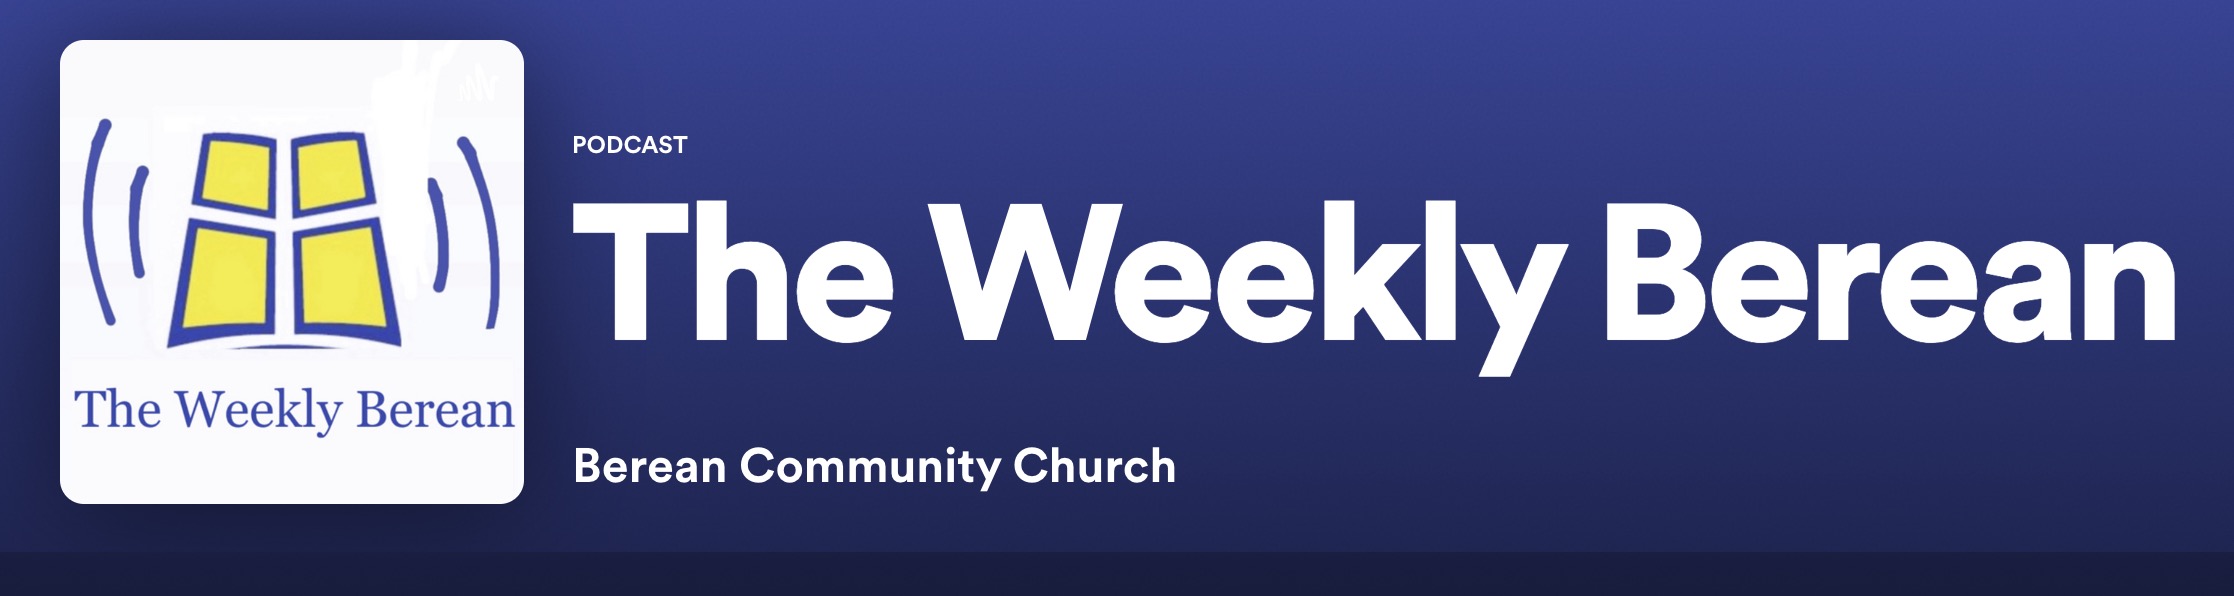 The Weekly Berean Podcast